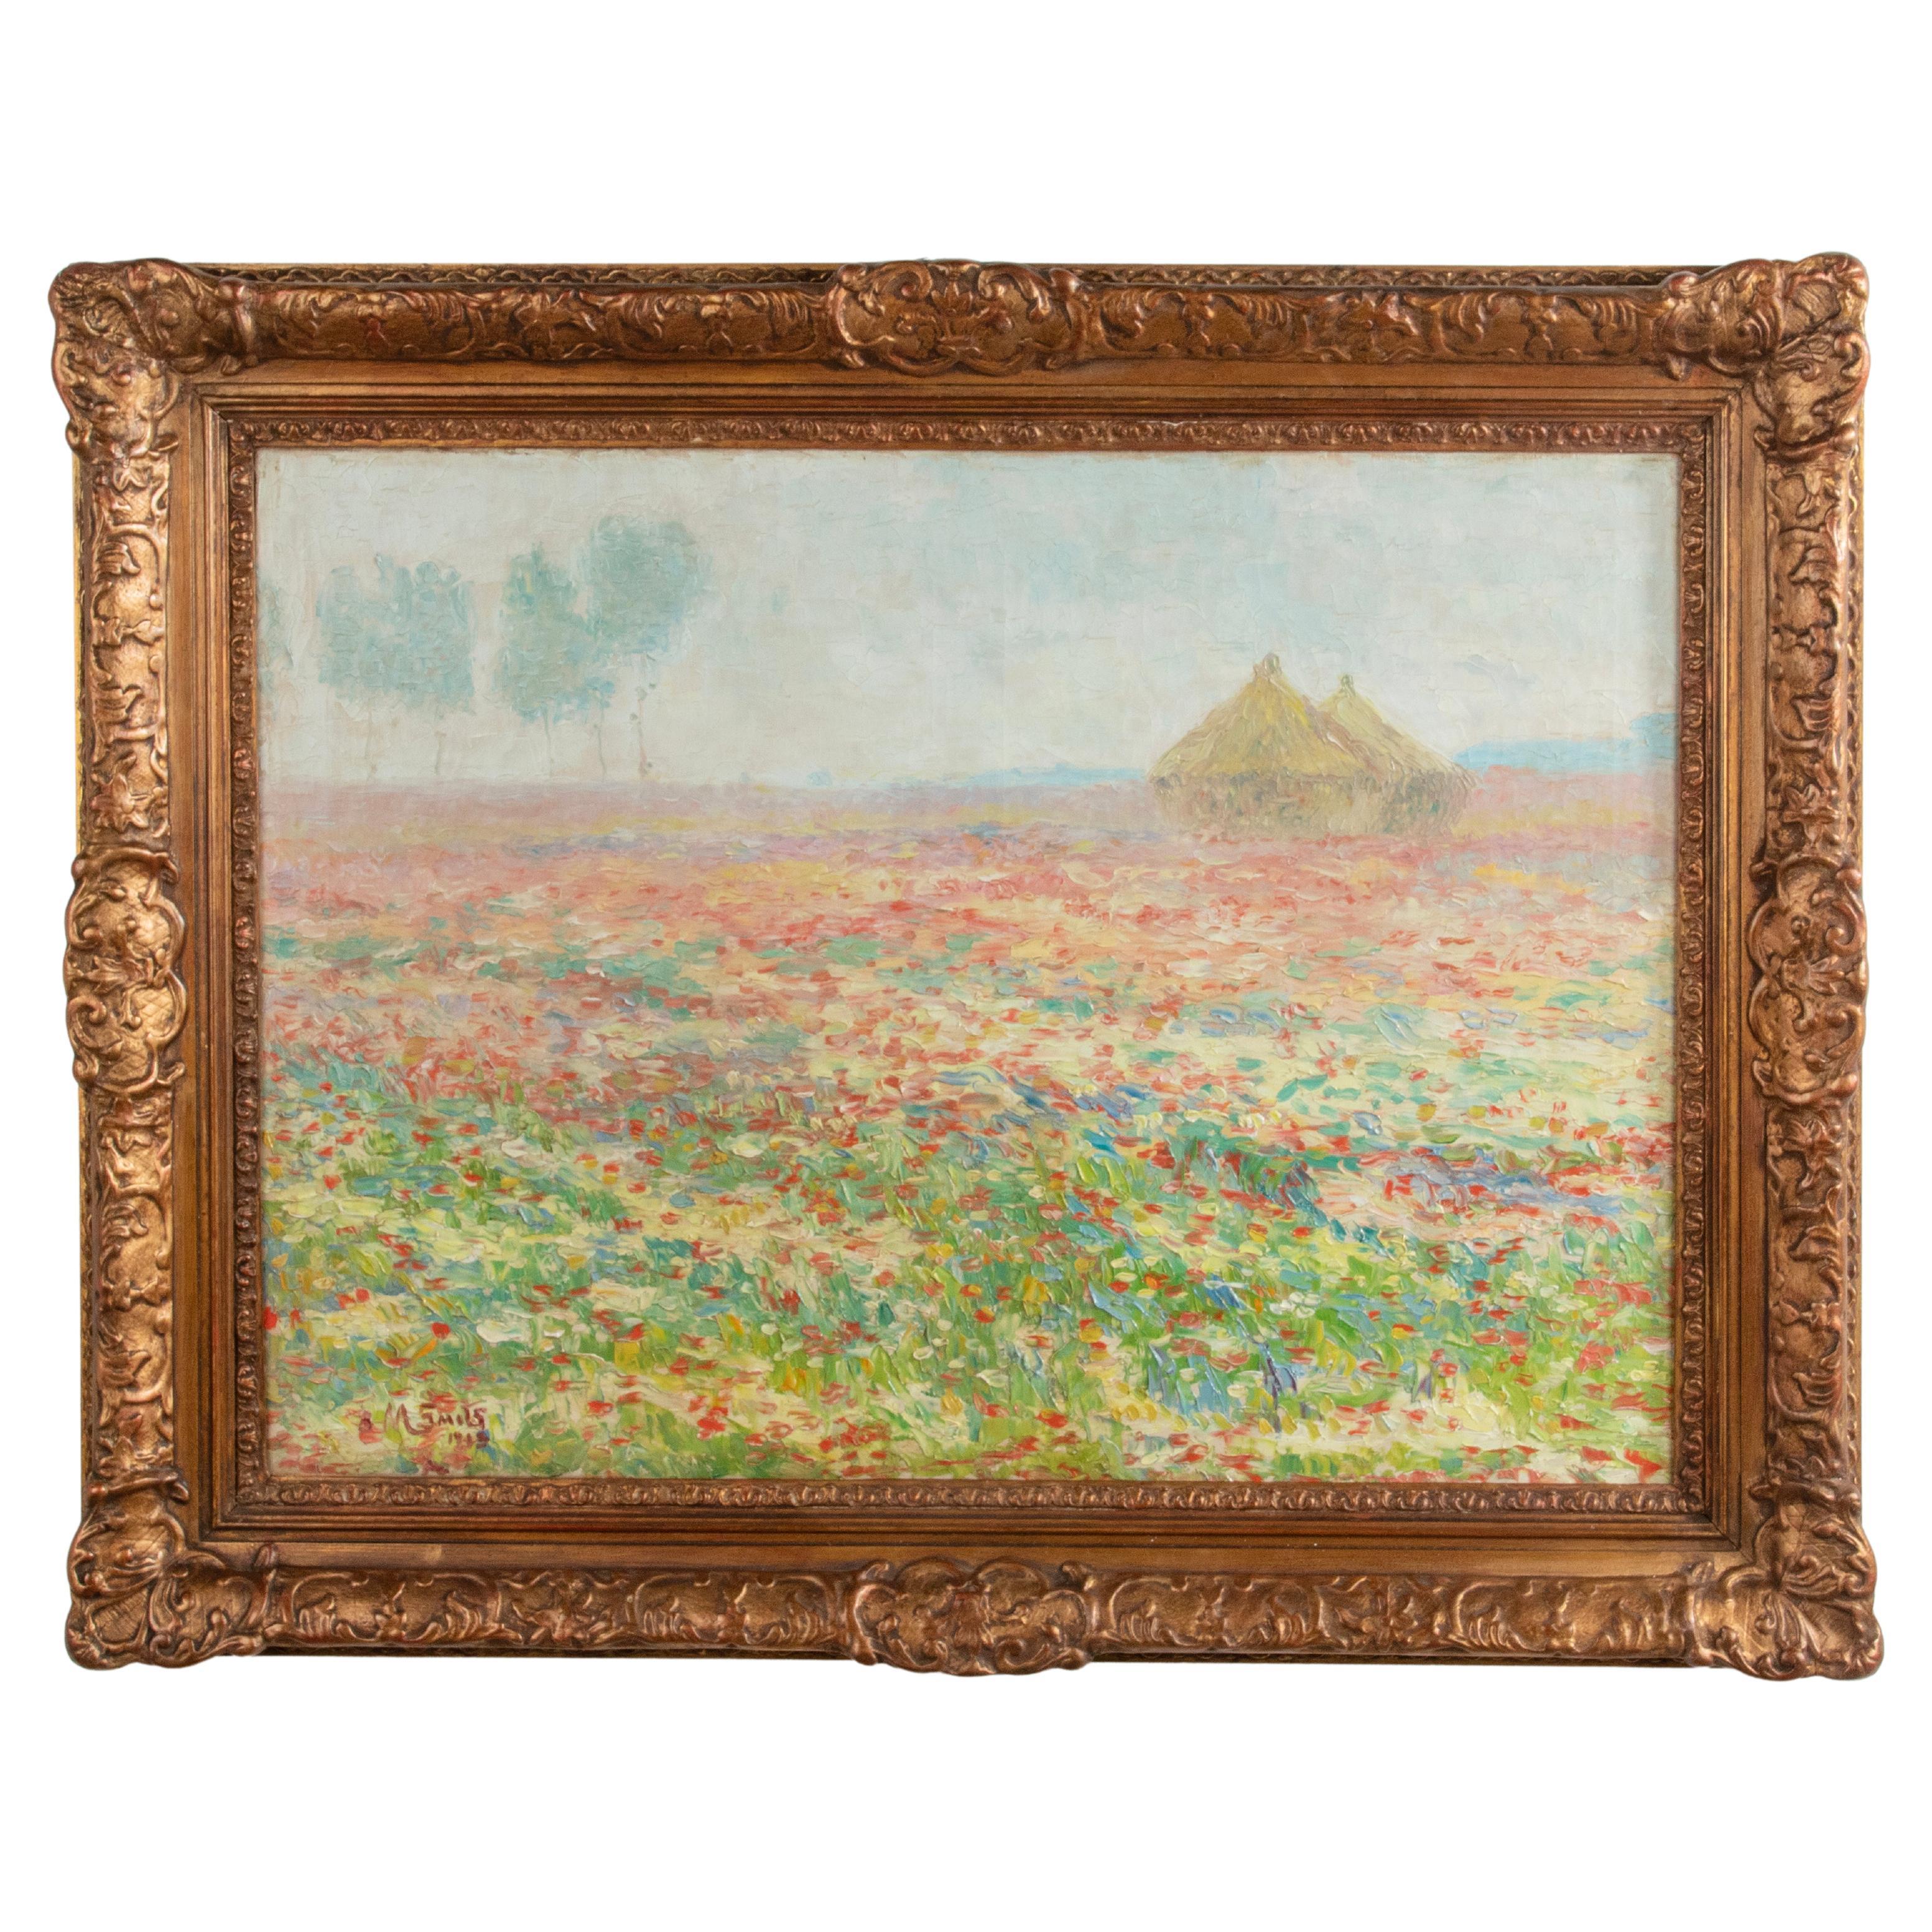 Early 19th Century Impressionistic Painting Signed and Dated E. Smits, 1913 For Sale